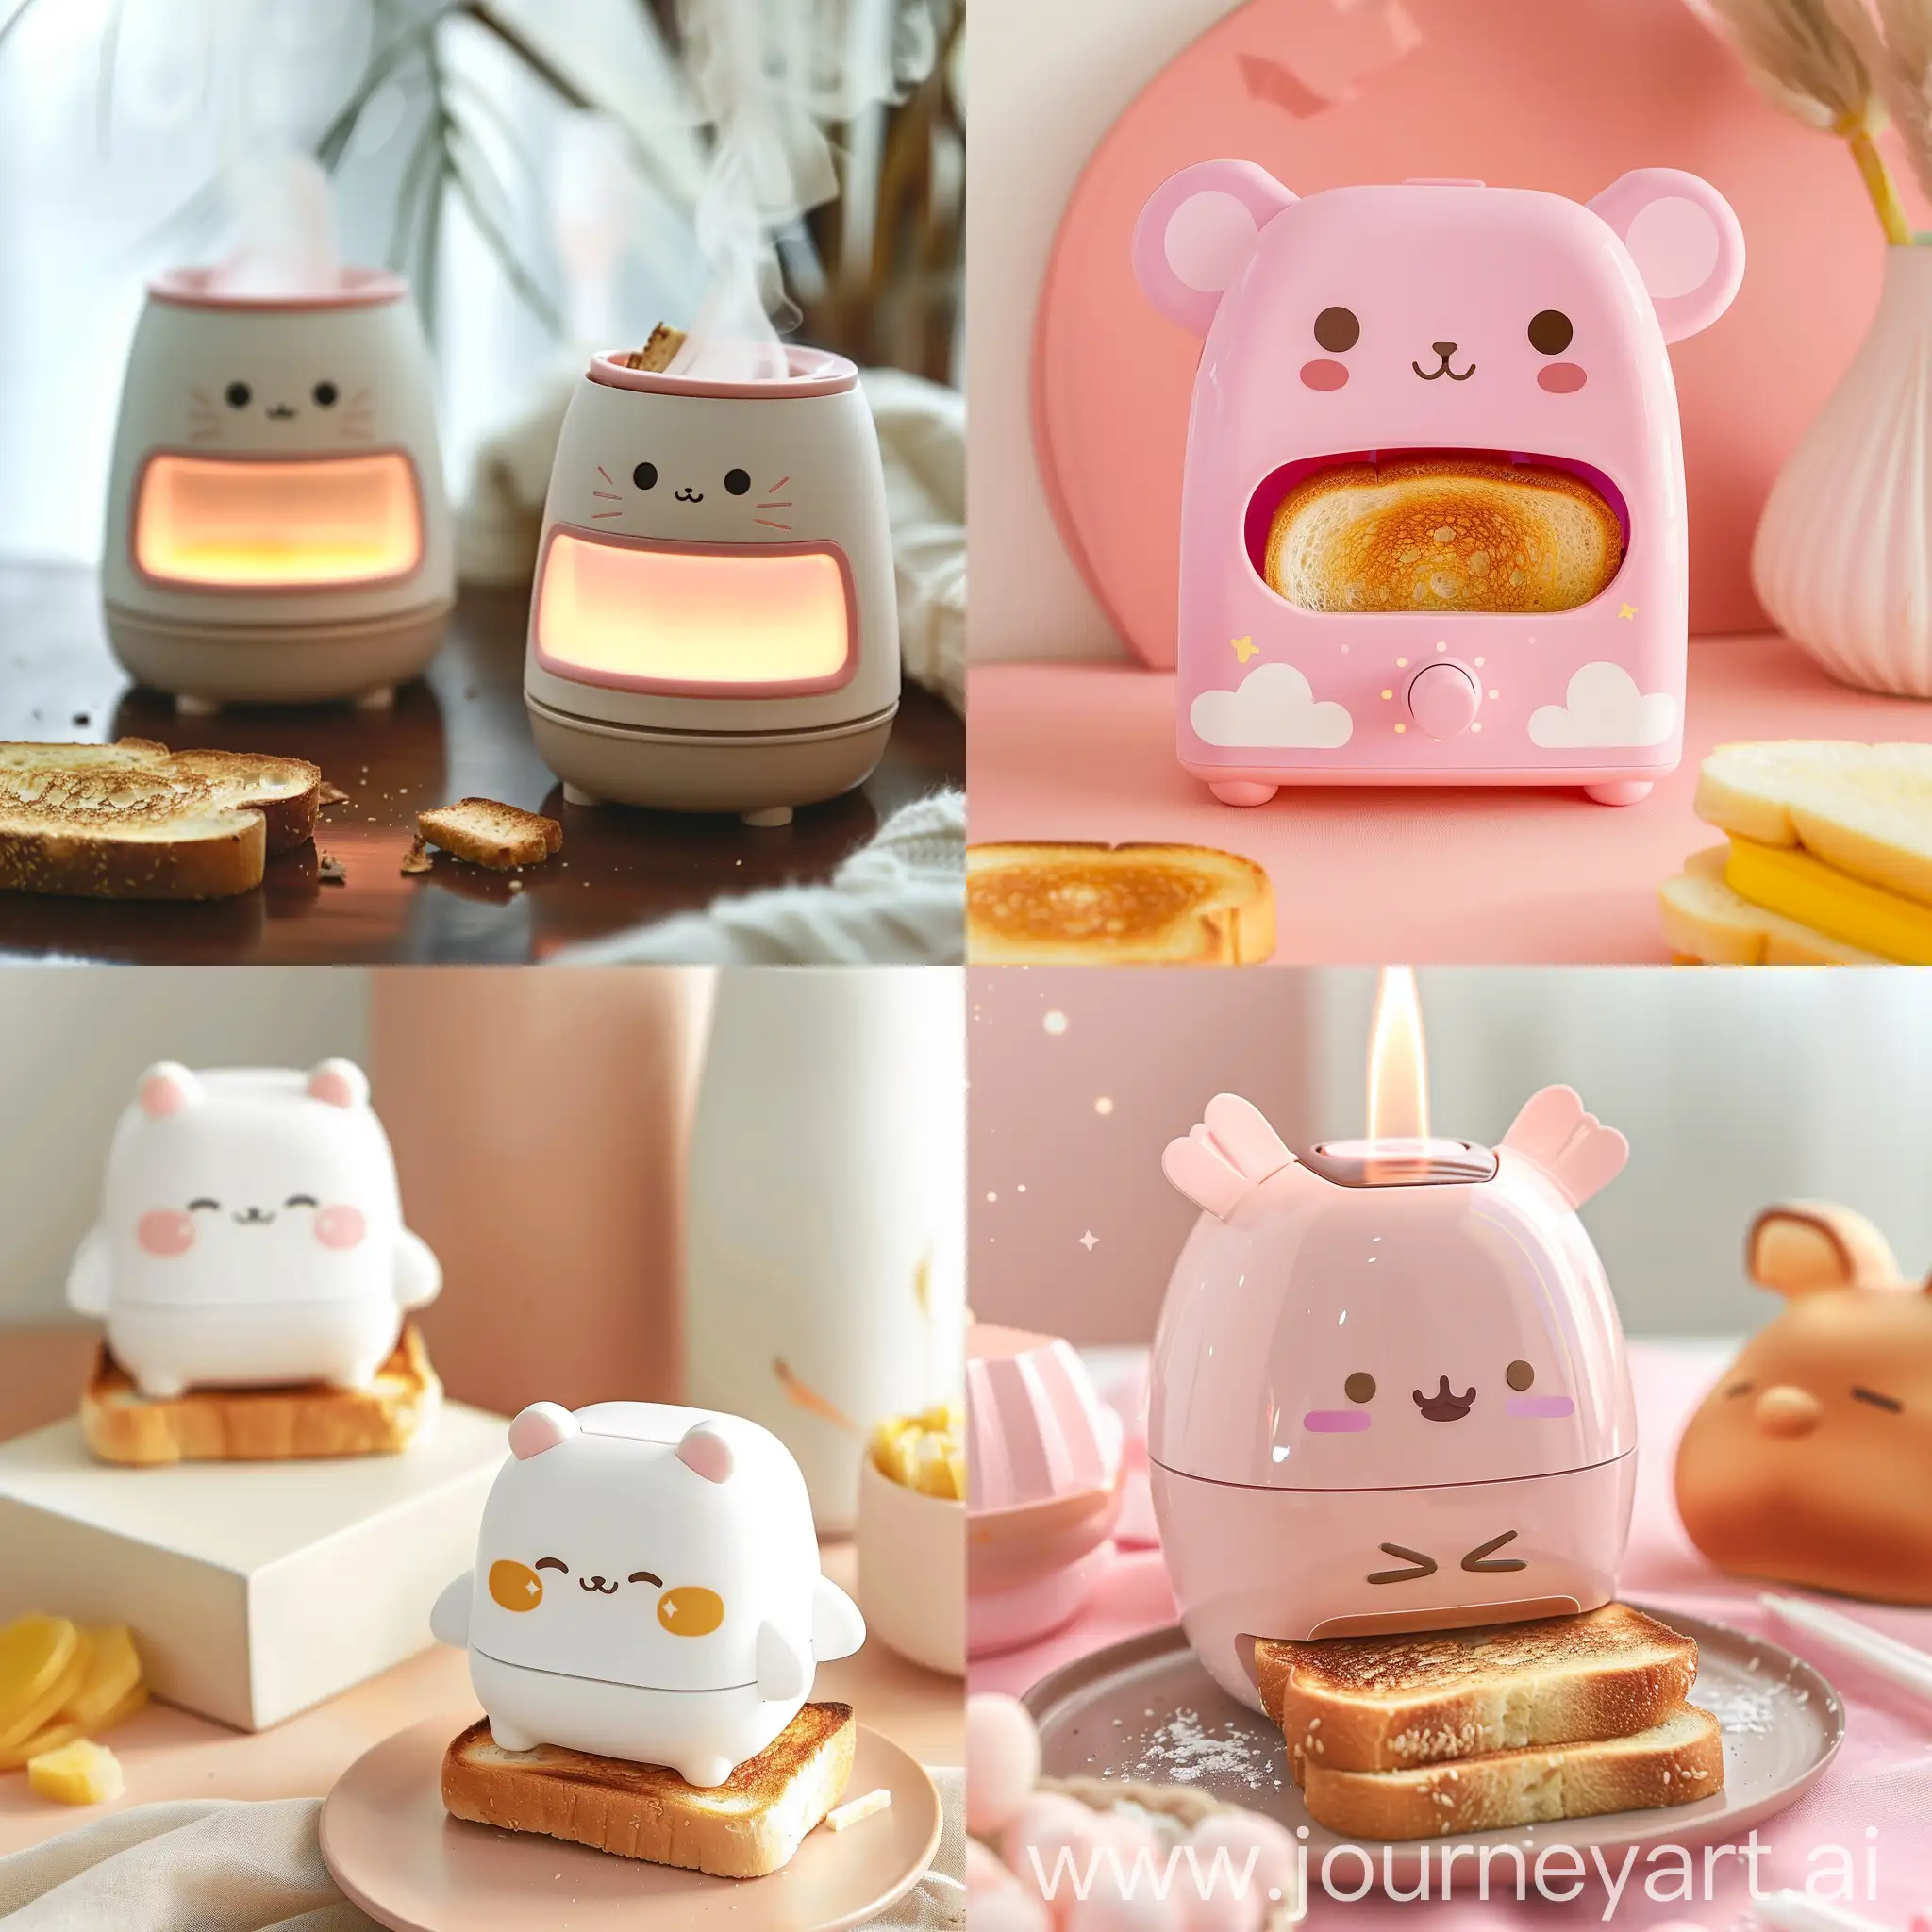 Adorable-Toast-Making-Machine-in-a-Charming-Kitchen-Scene